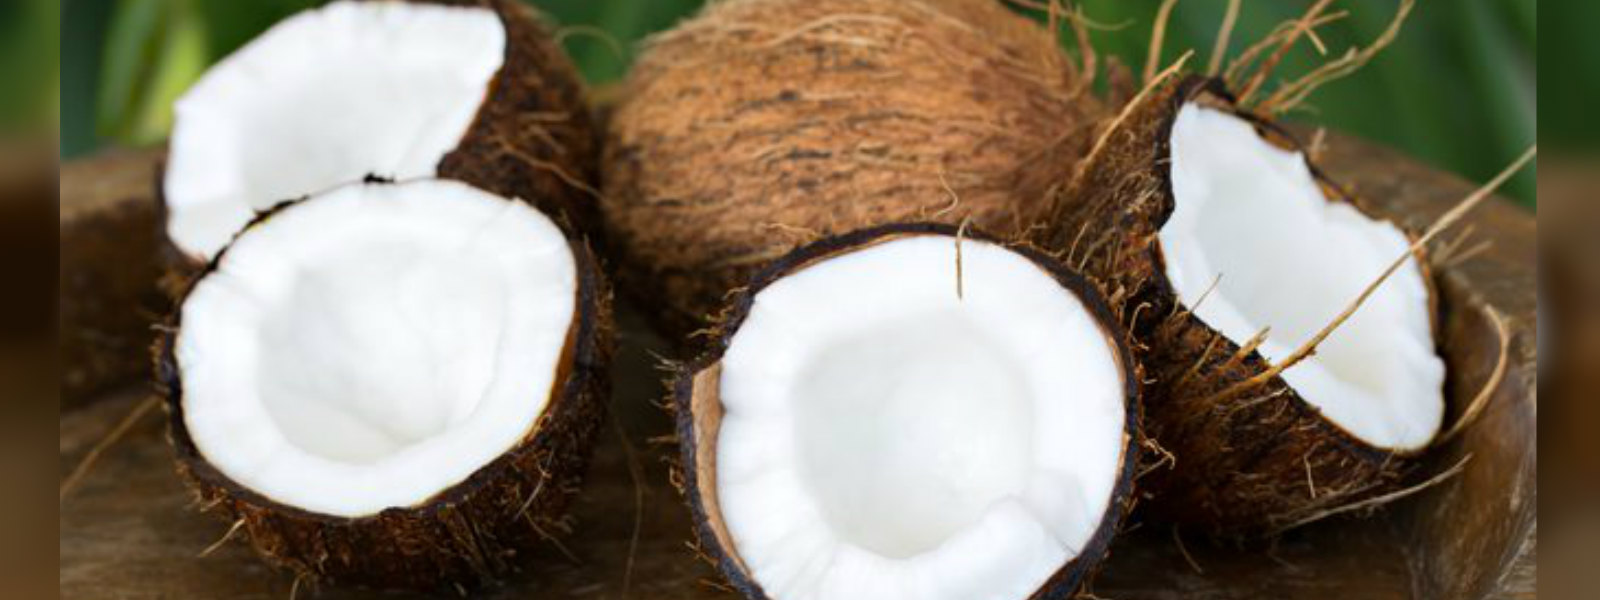 Price of a Coconut hits Rs. 100/- mark